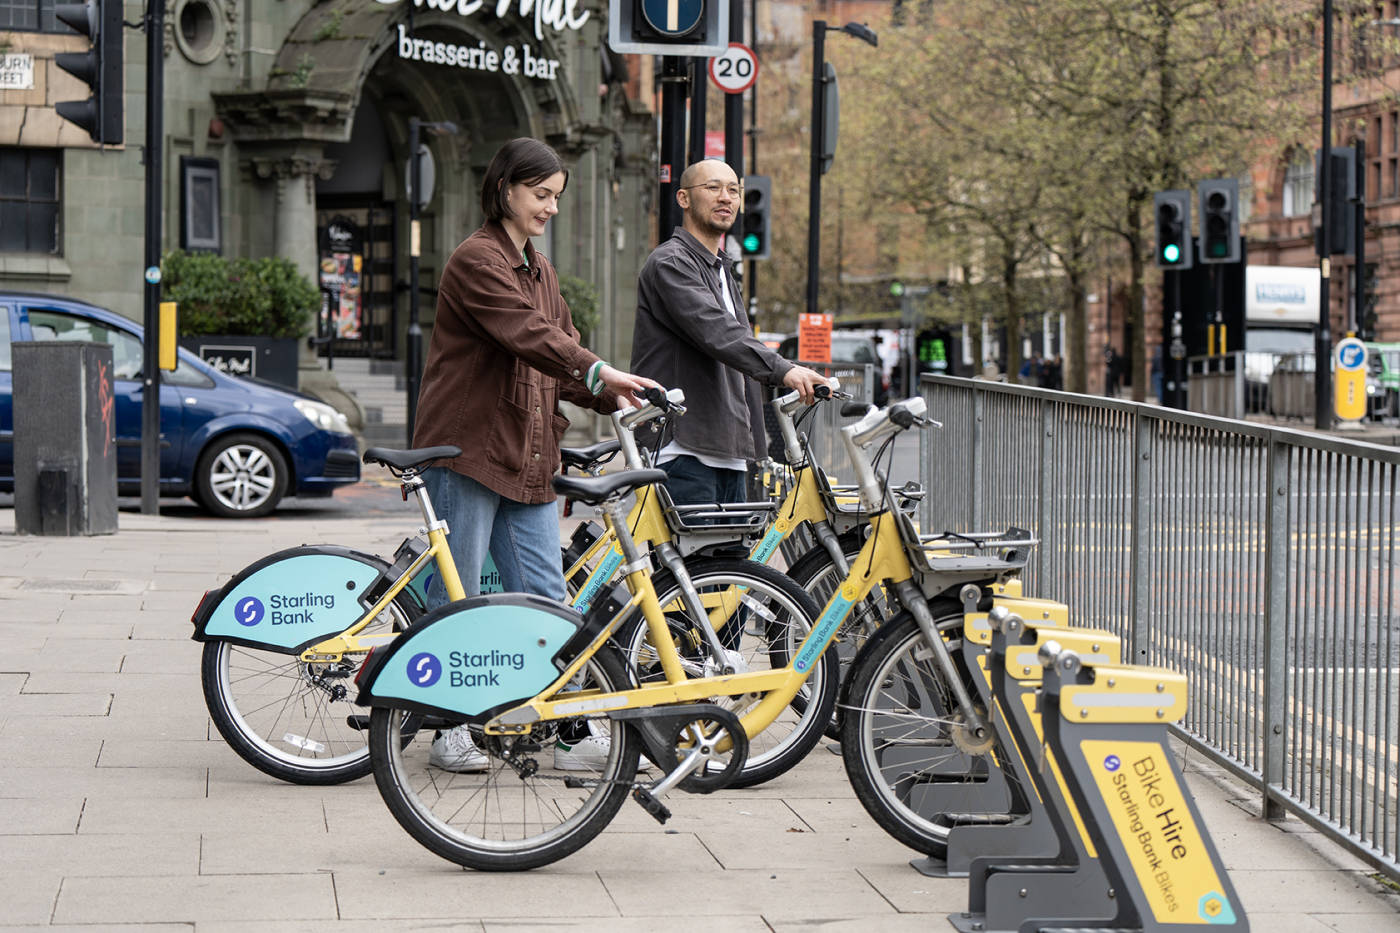 Two people docking their starling bank bikes